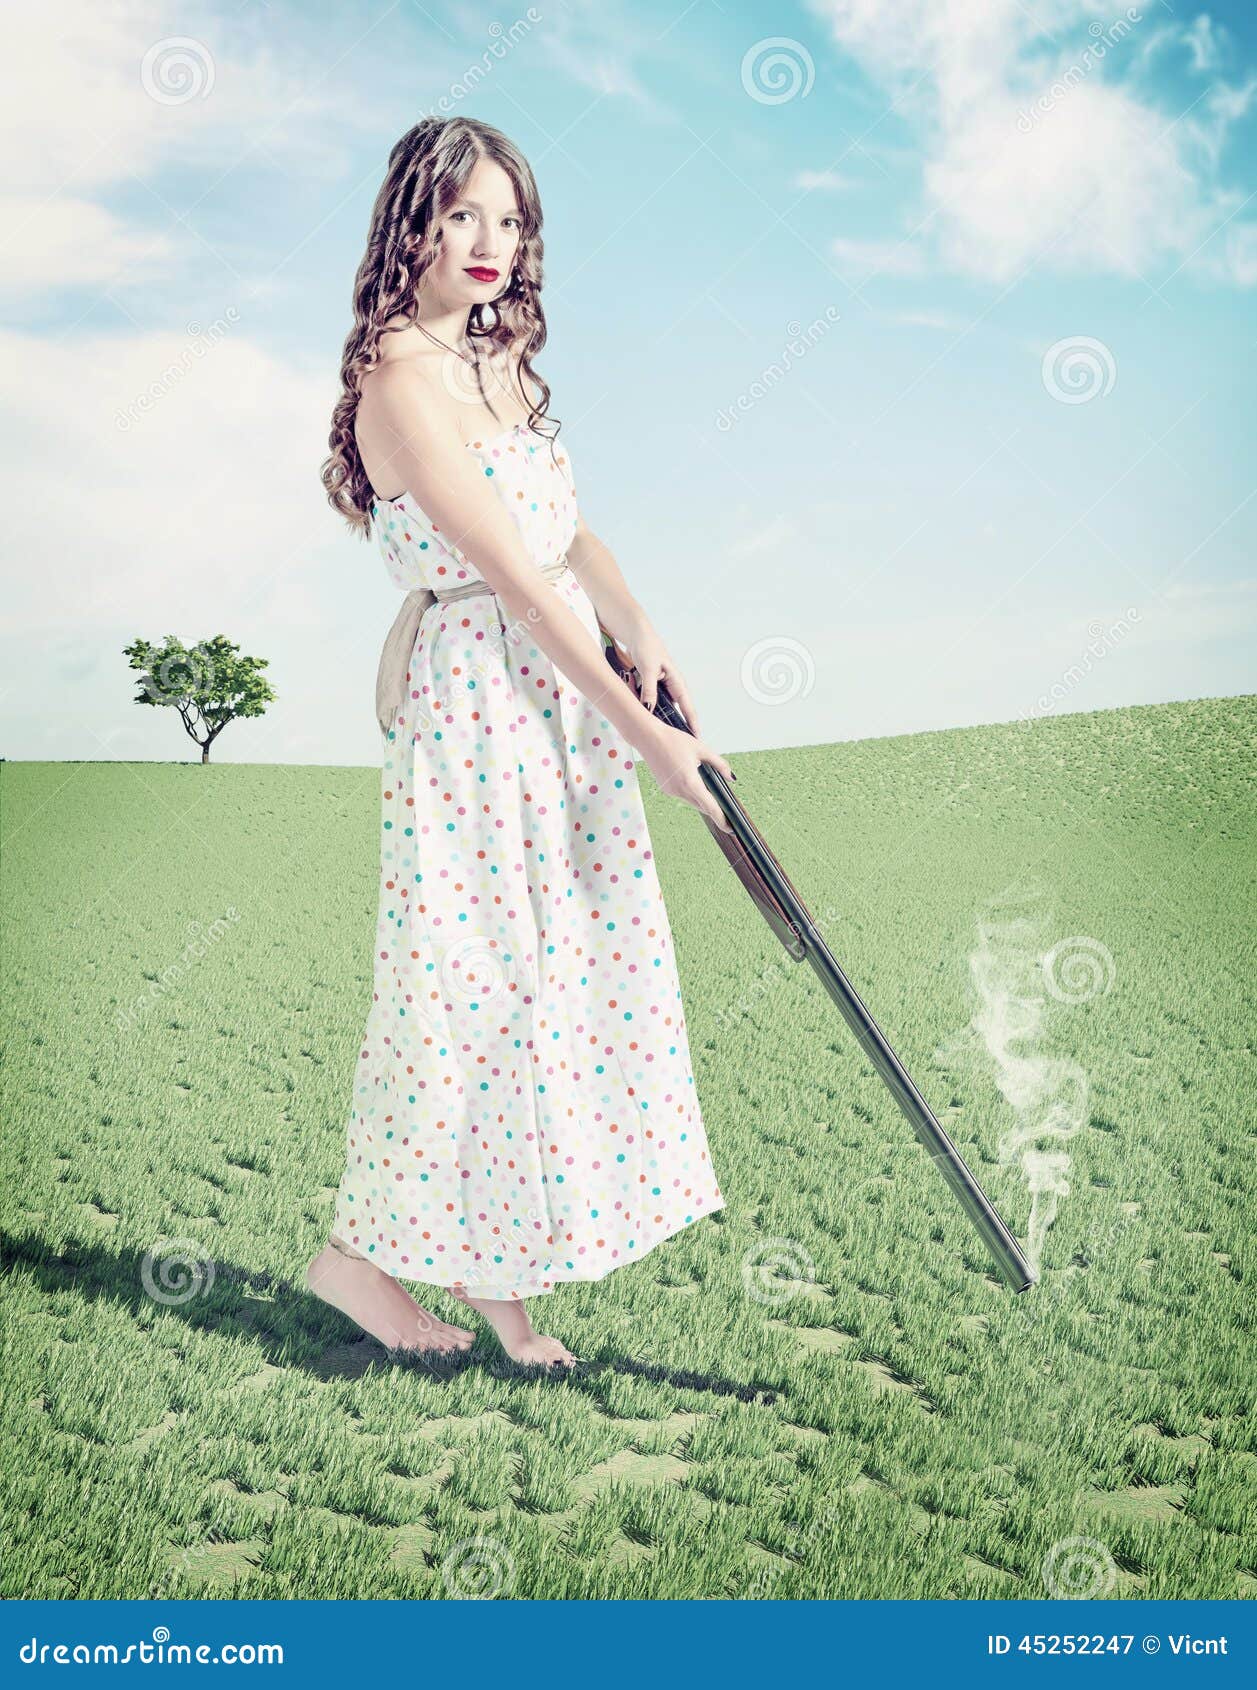 https://thumbs.dreamstime.com/z/young-girl-shot-hat-beautiful-hunter-creative-concept-photo-cg-elements-combinated-45252247.jpg